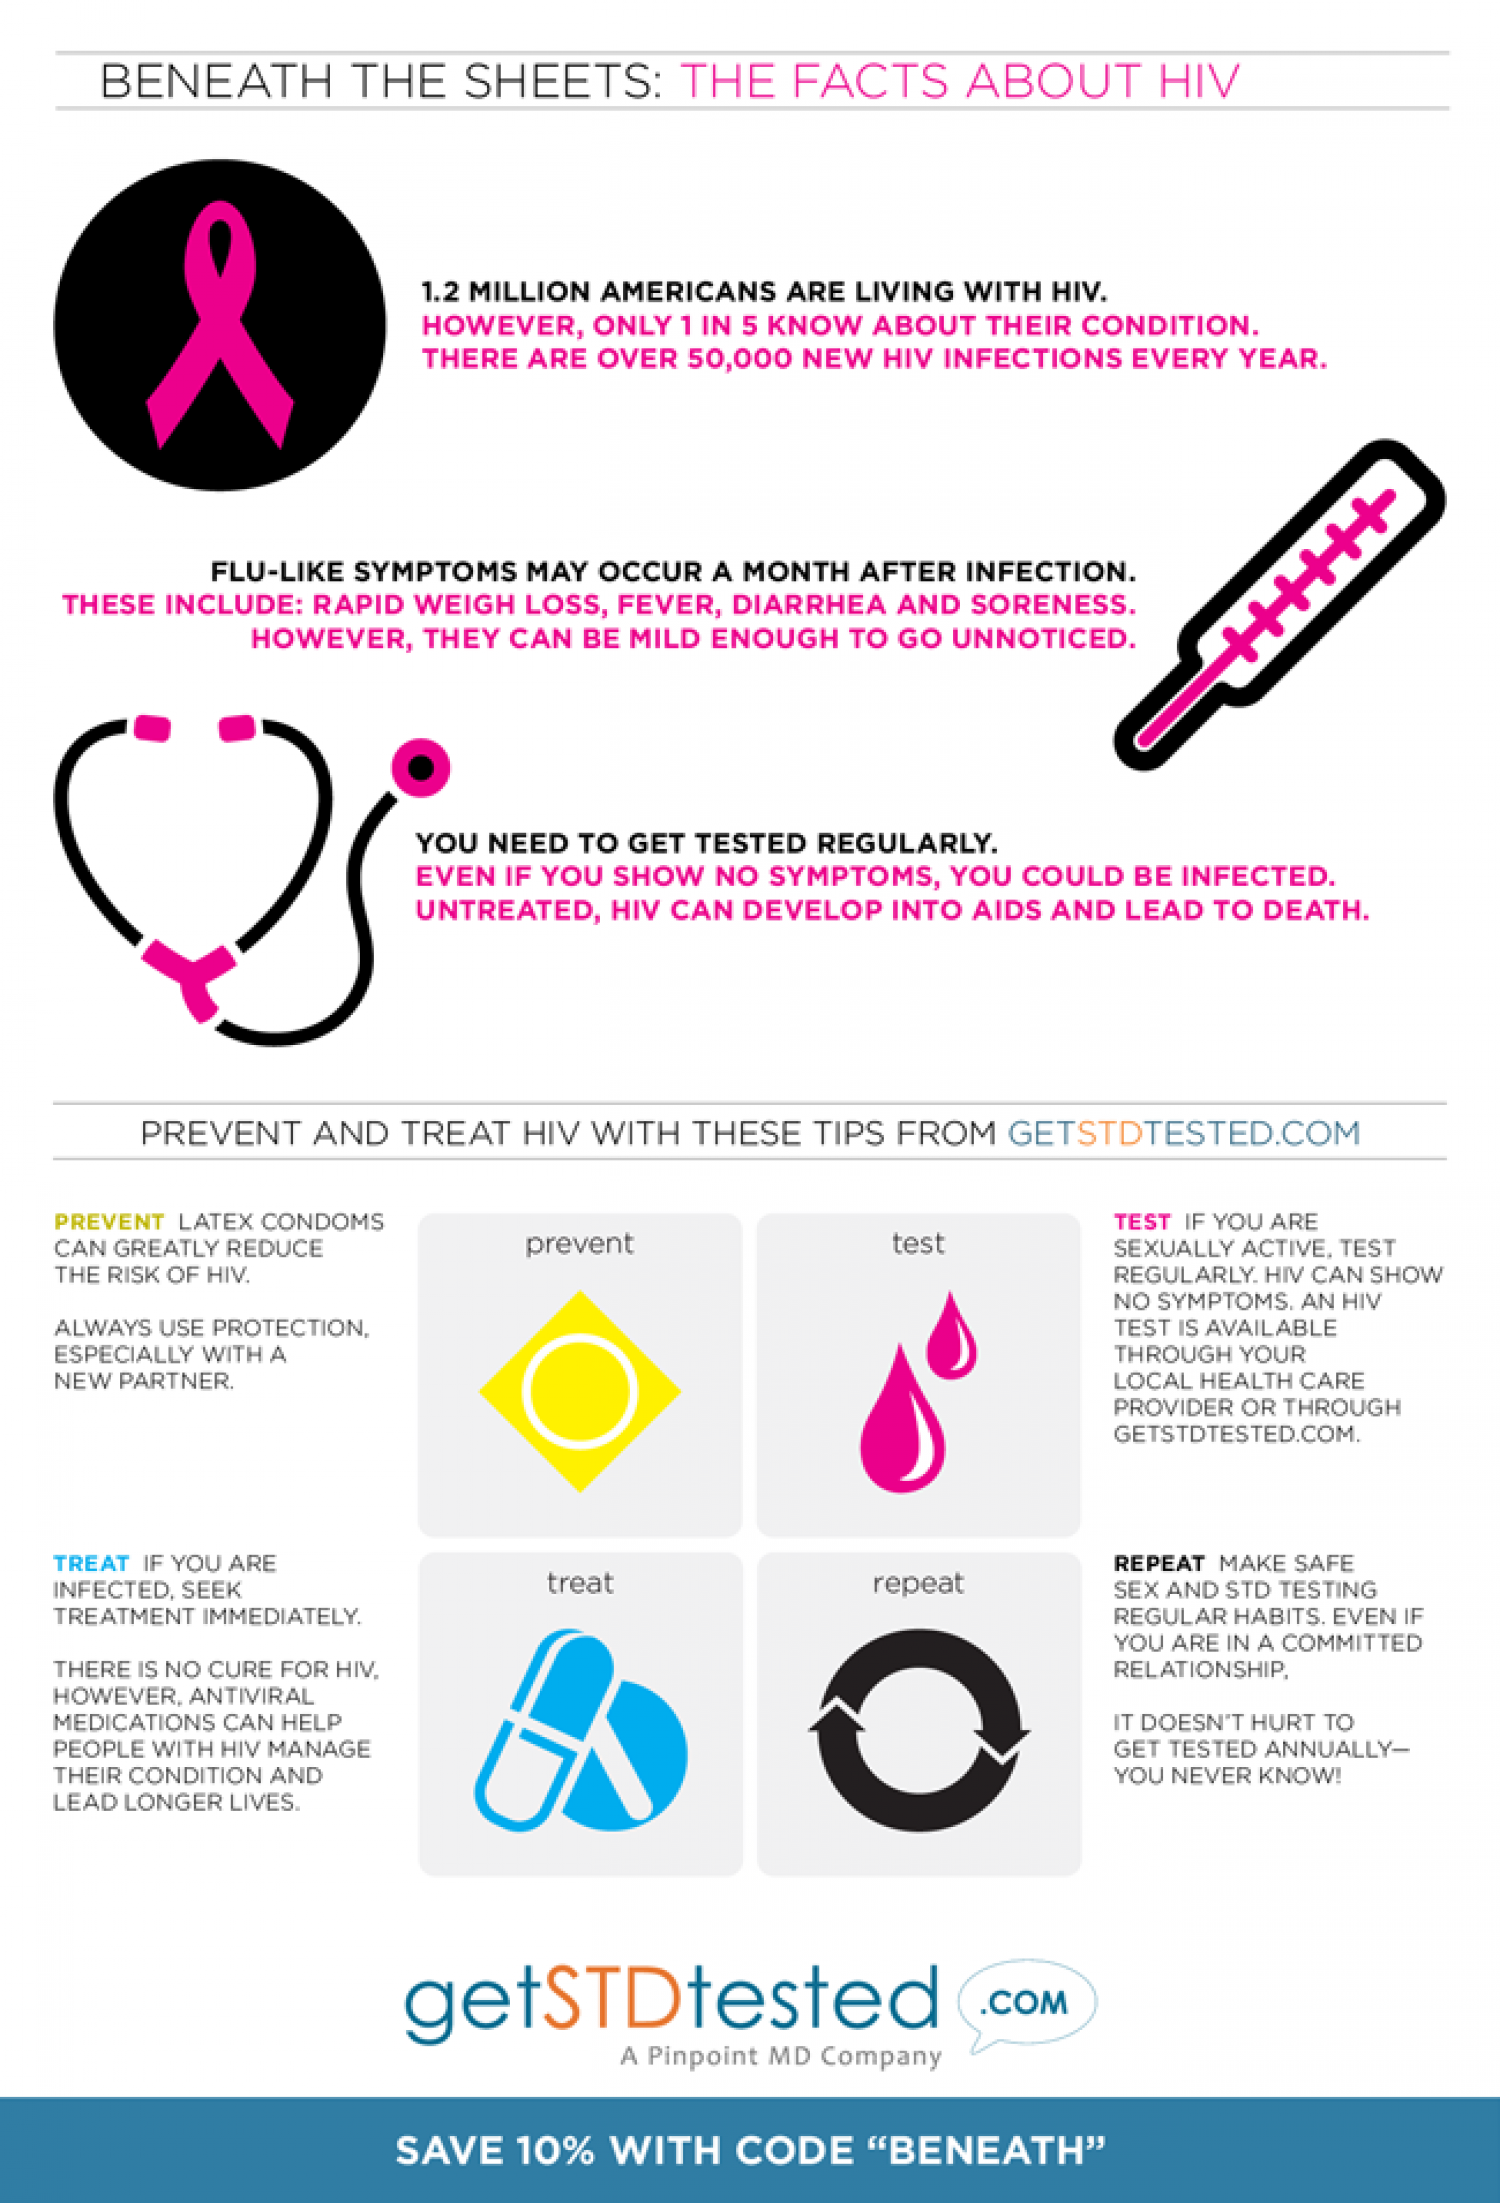 The Facts About HIV